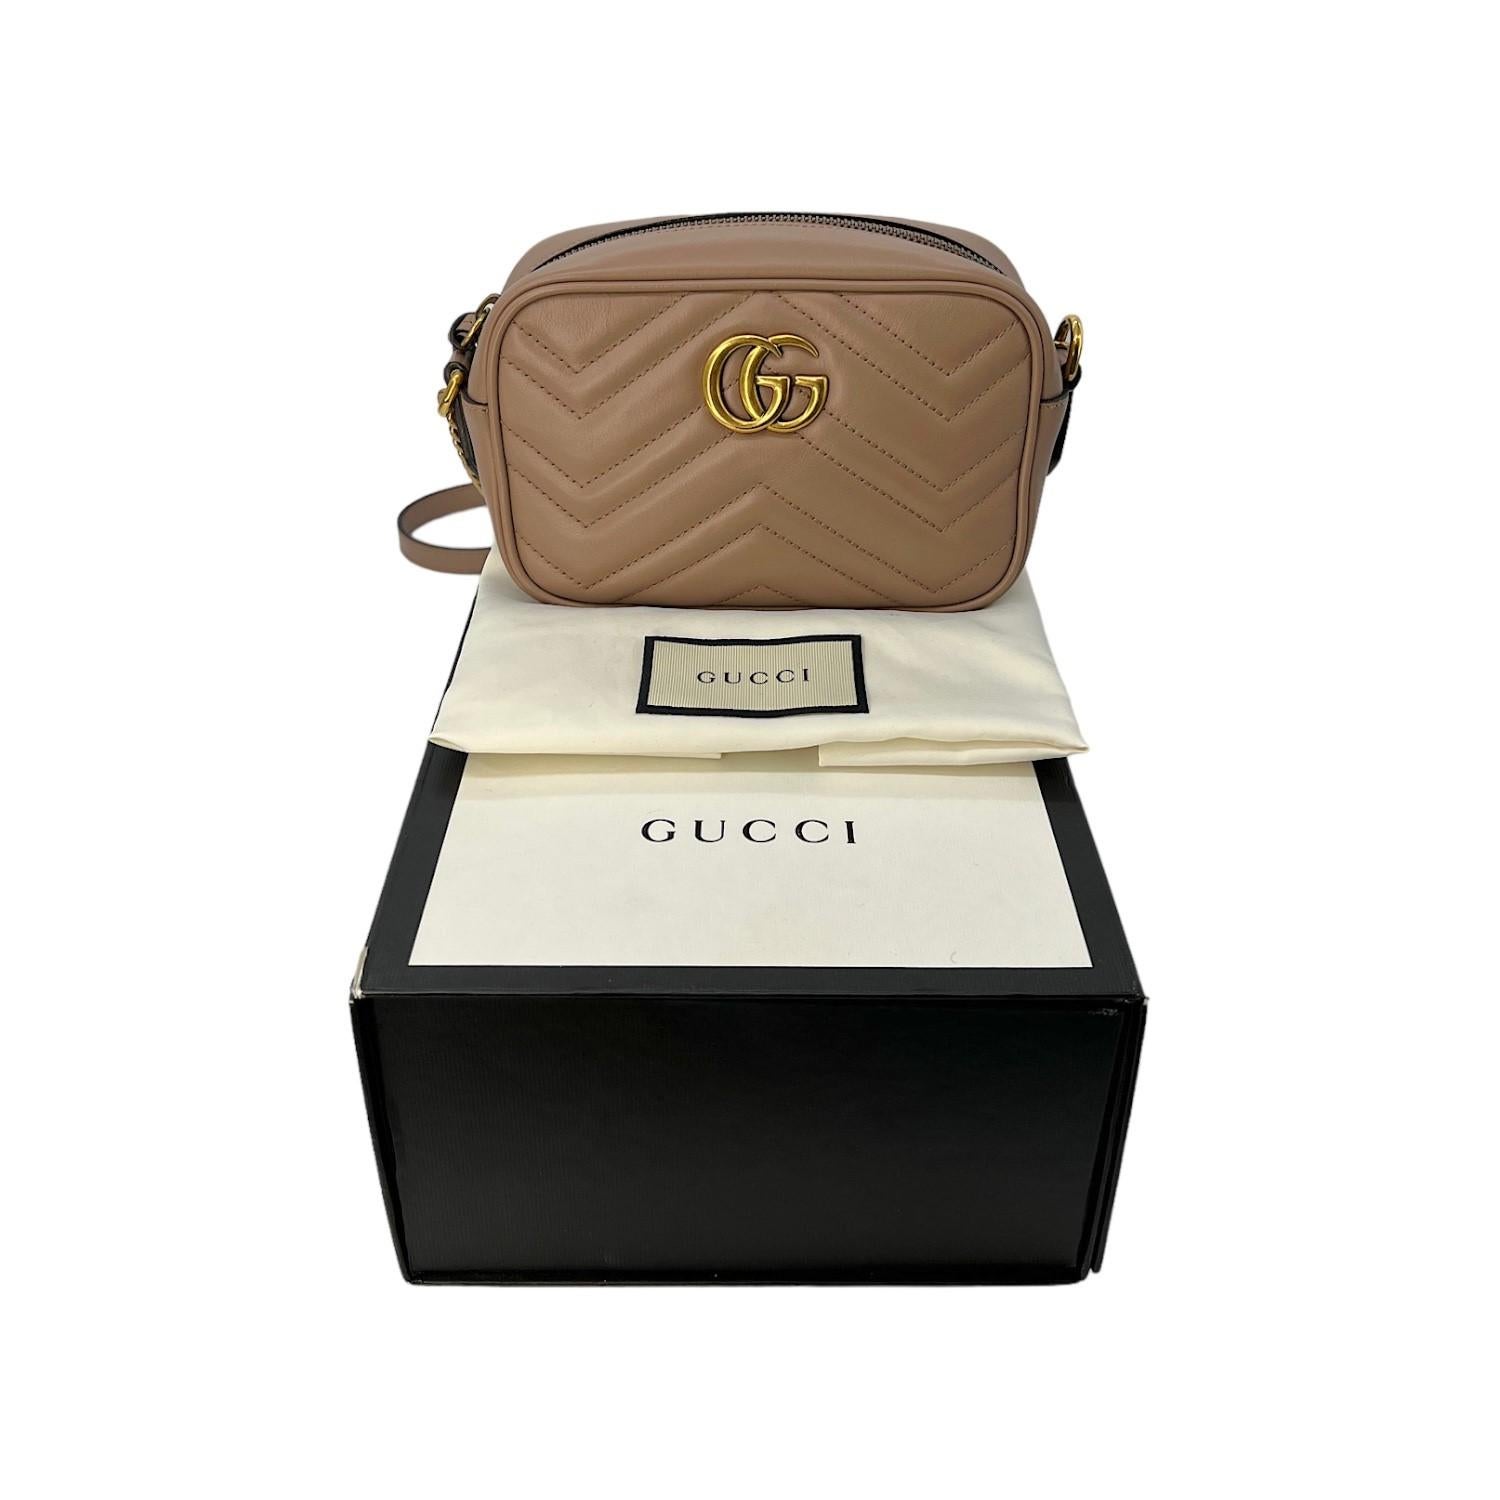 This Gucci Marmont Matelassé Mini Shoulder Bag was made in Italy and it is finely crafted of Gucci GG Matelassé leather with gold-tone hardware features. It has a flat leather shoulder strap. It has a zipper closure that opens up to a spacious suede